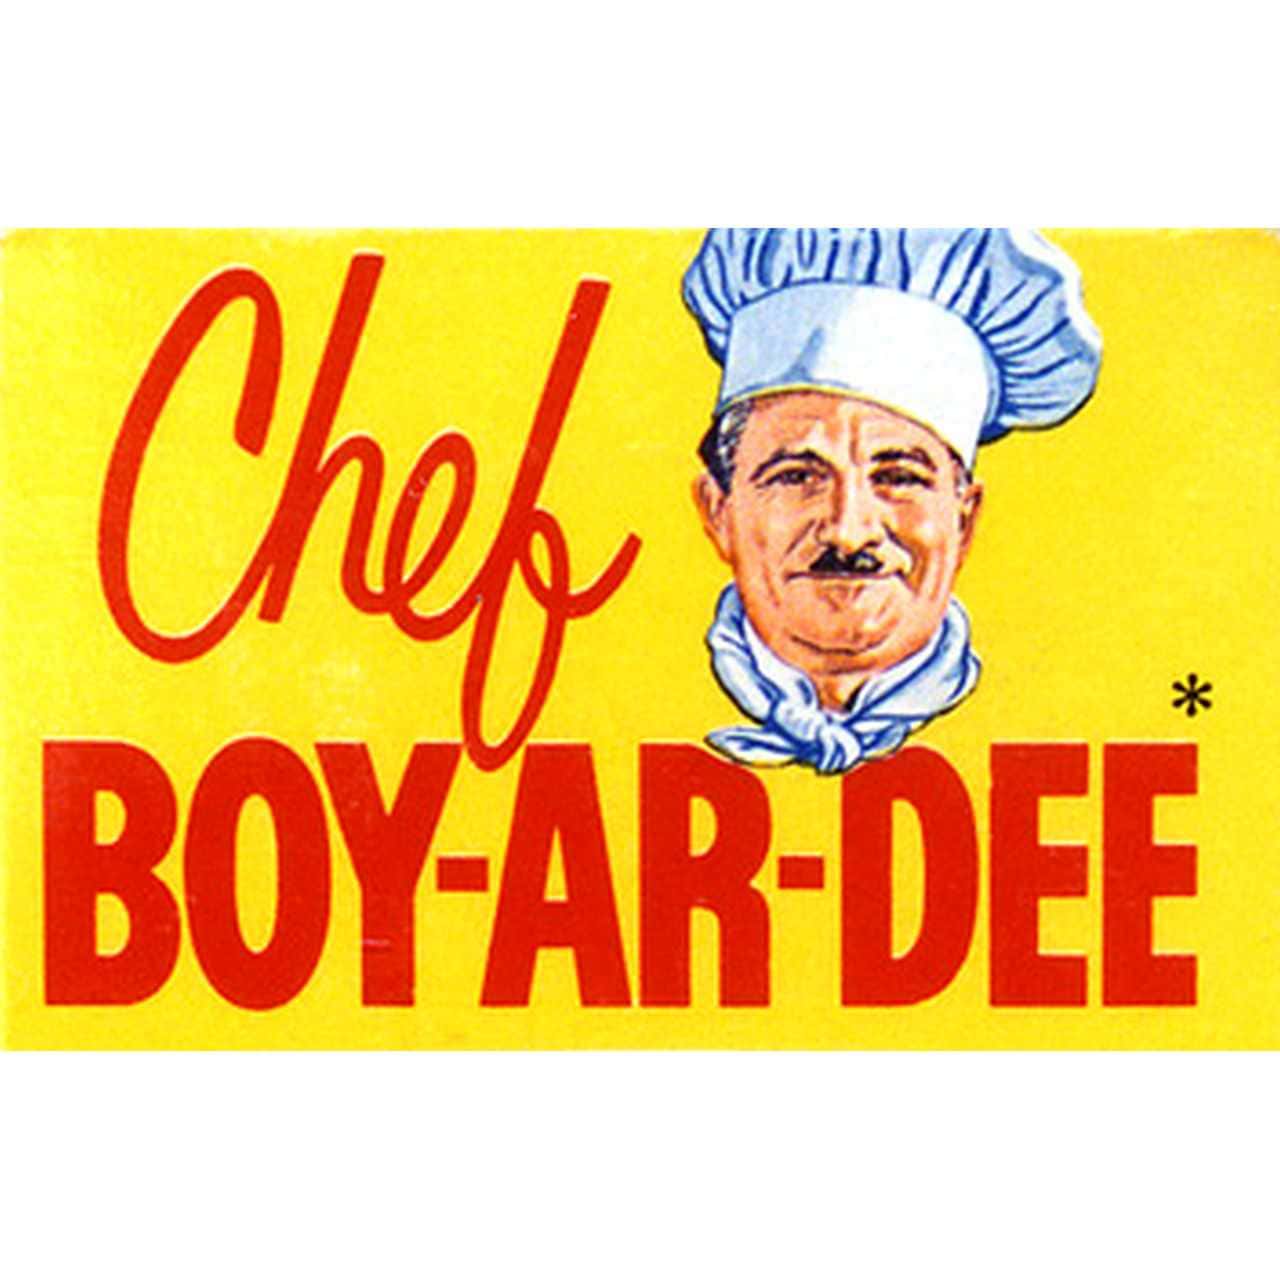 logo - What is the story behind the old popular picture of a cook